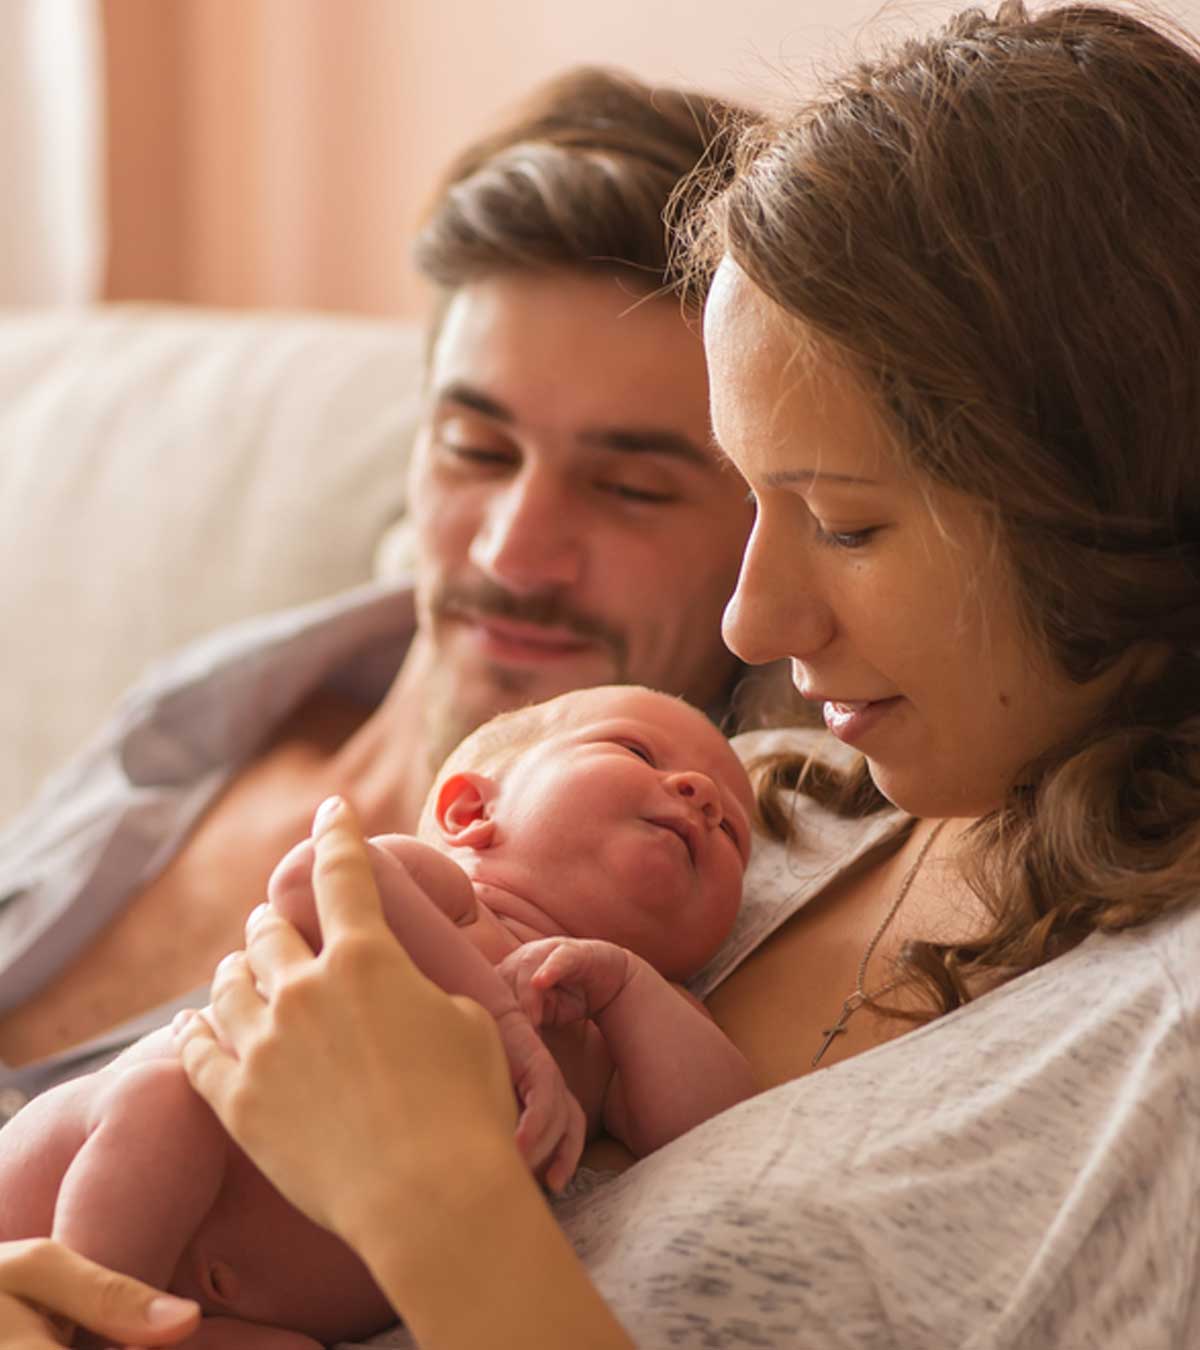 Why New Dads Feel So Lonely Raising The New Babies They Love